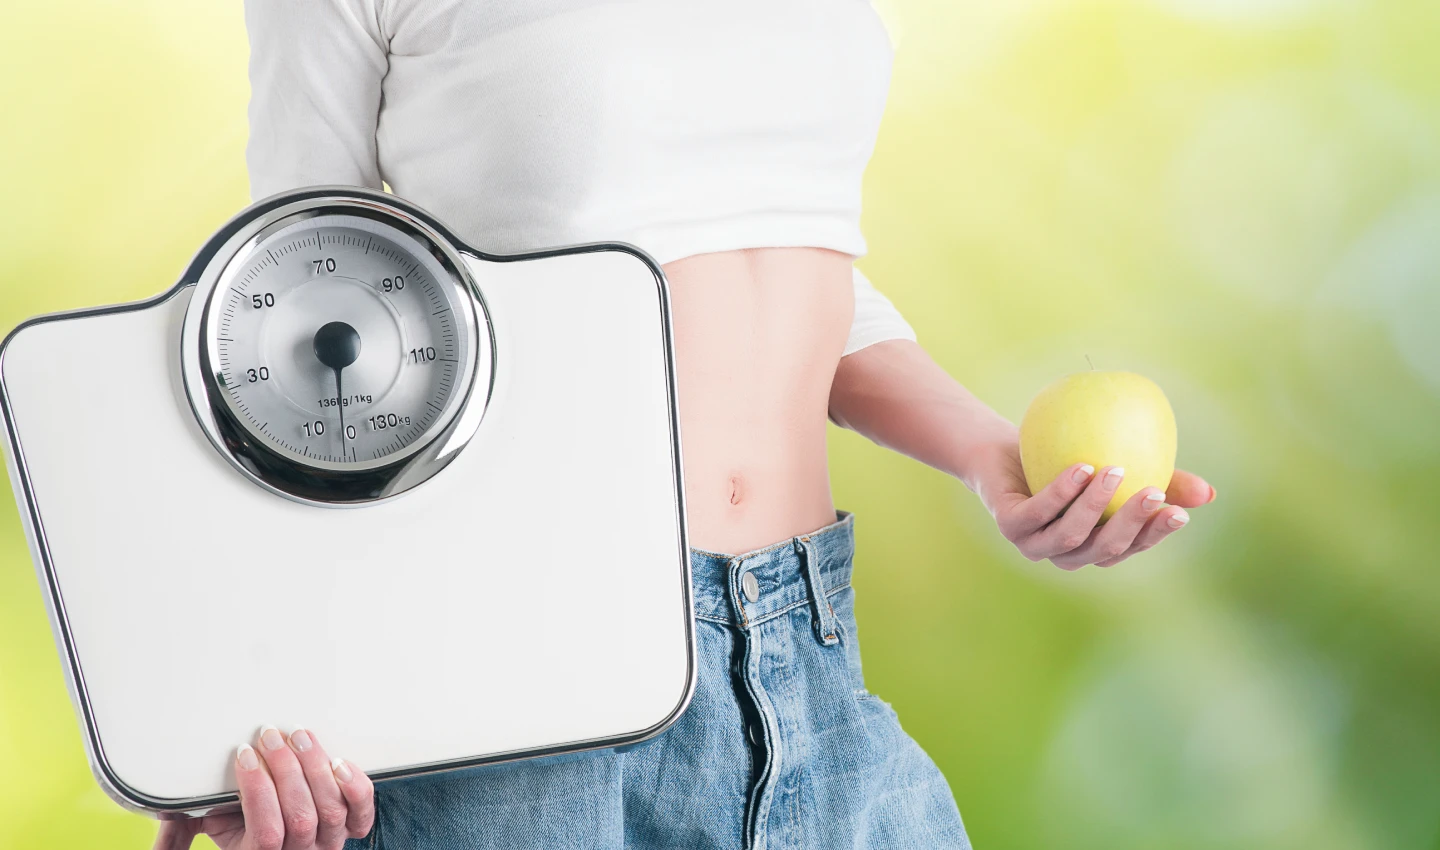 Image of a weight scale next to a person who has undergone body cosmetic surgery and weight loss procedures, emphasizing the importance of realistic expectations and commitment to a healthy lifestyle.